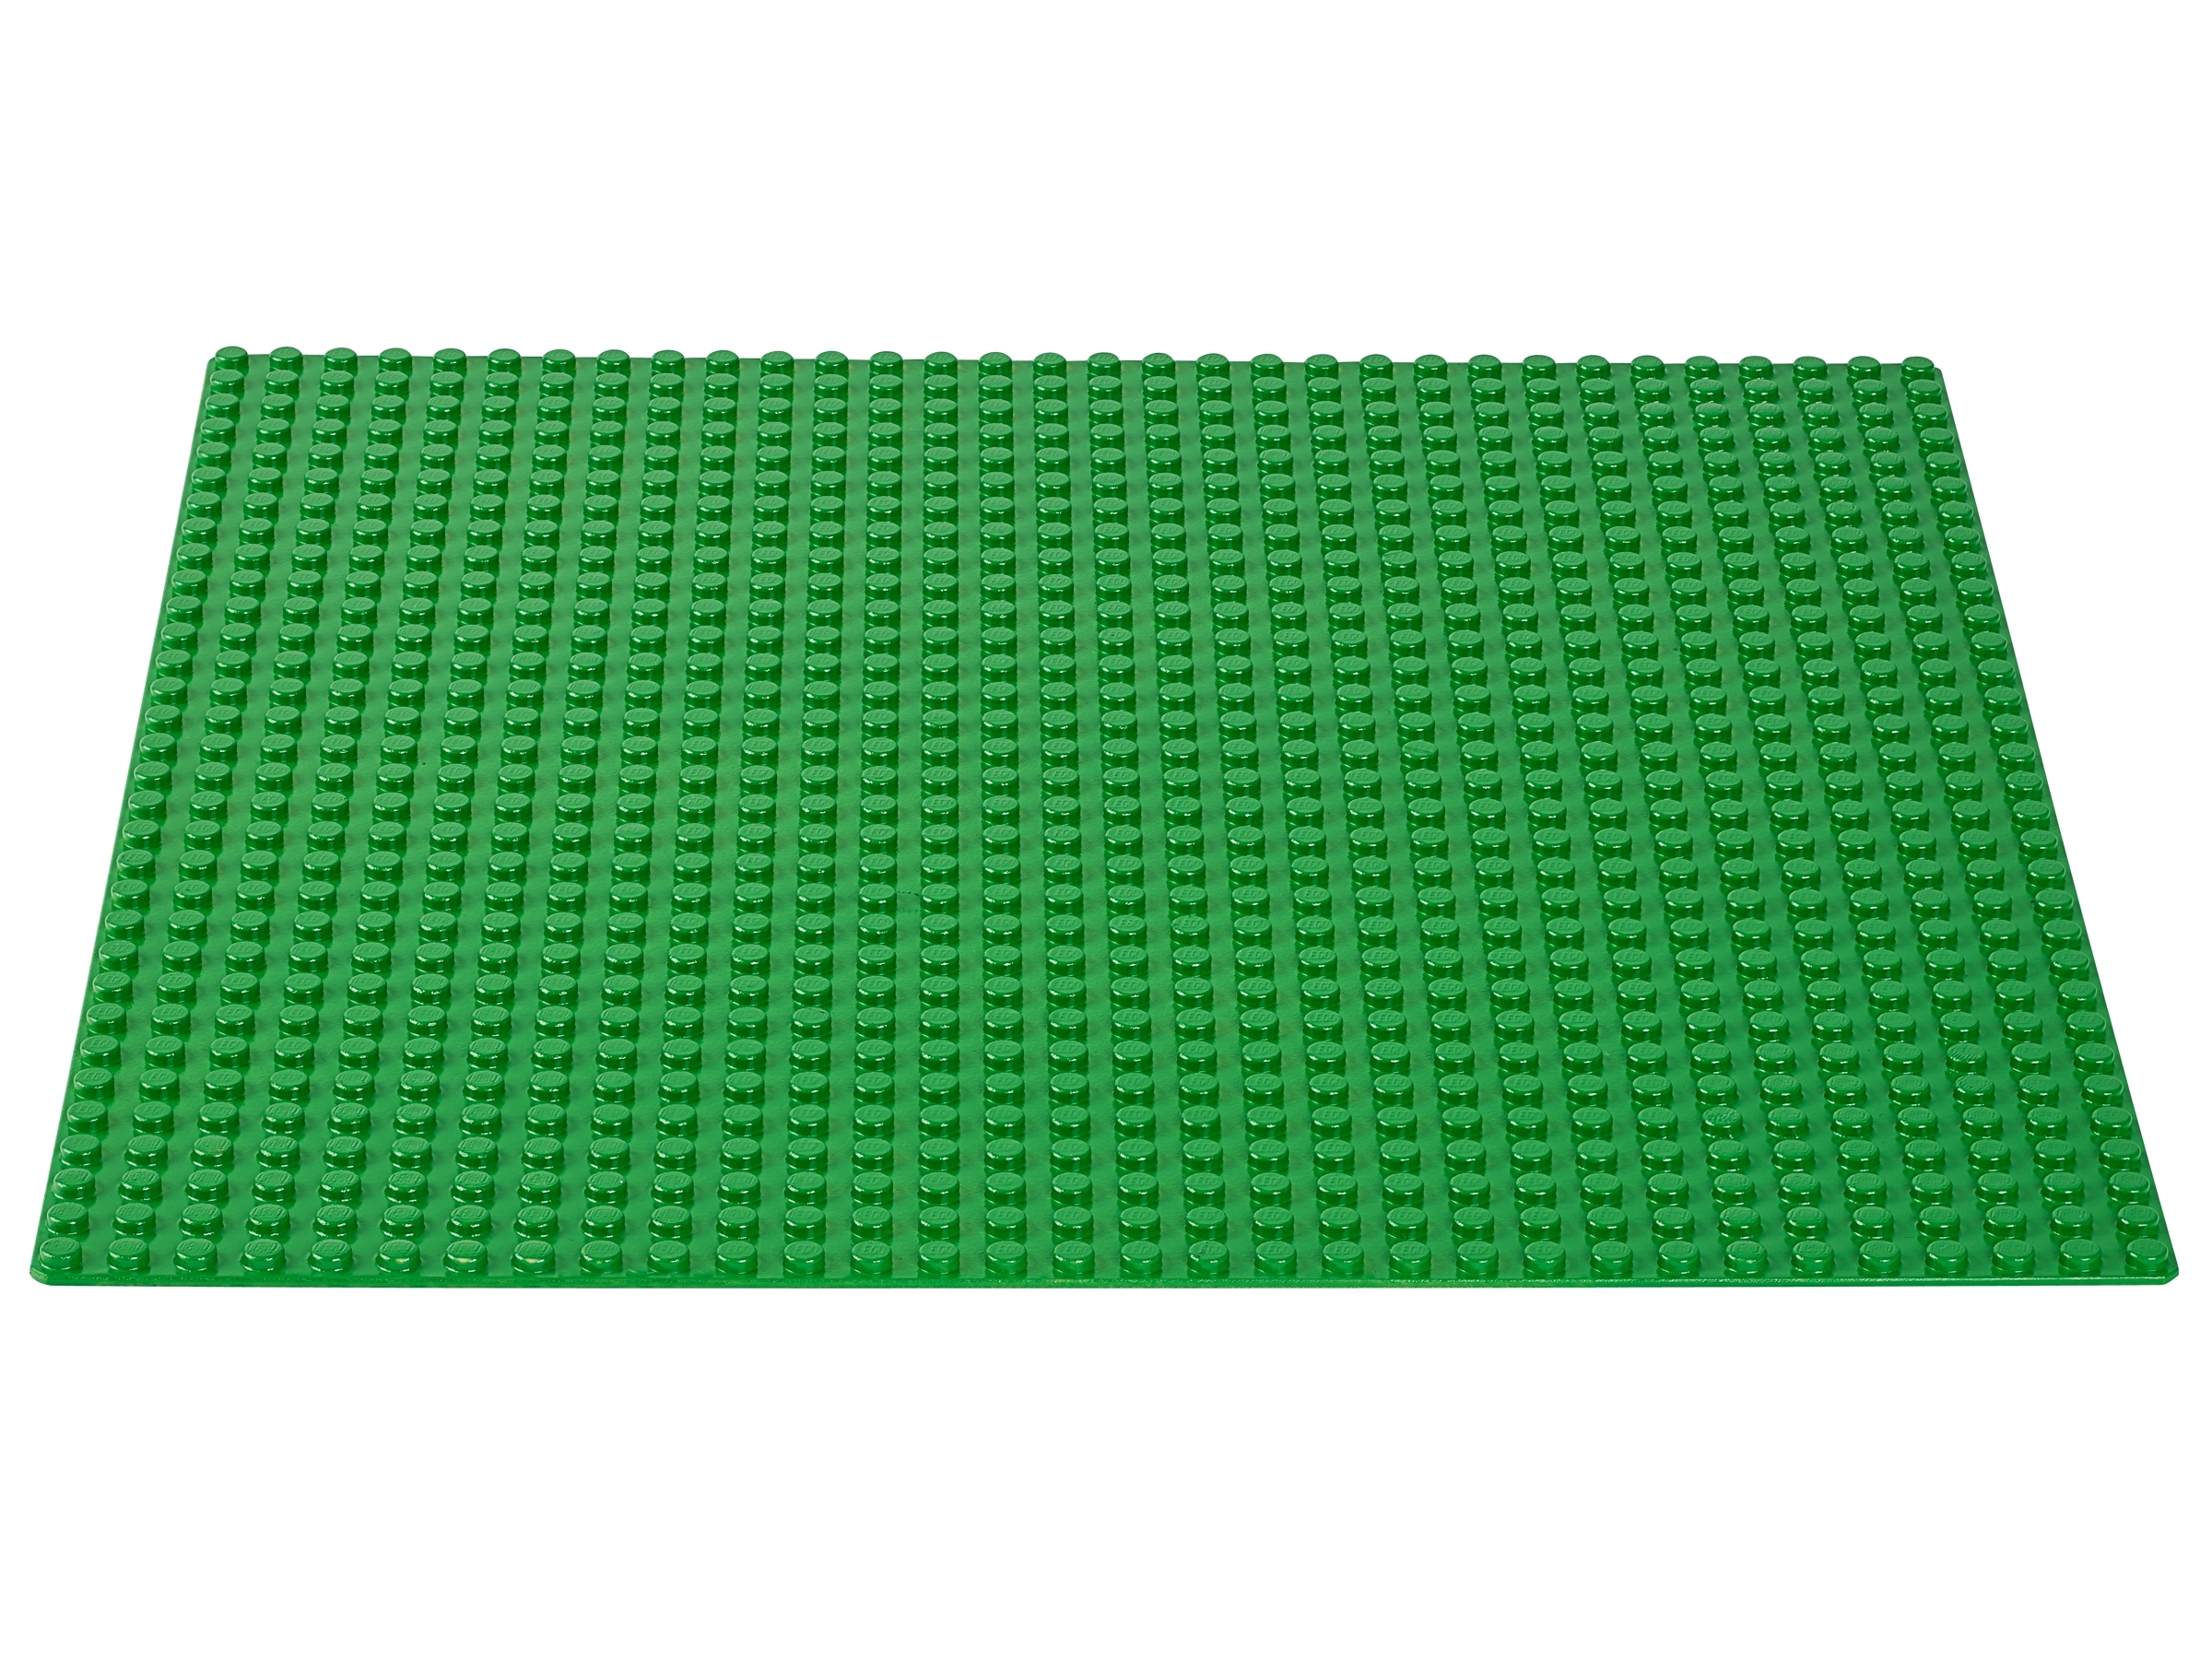 LEGO Lot of 12 Green 1x4 Building Plate Pieces